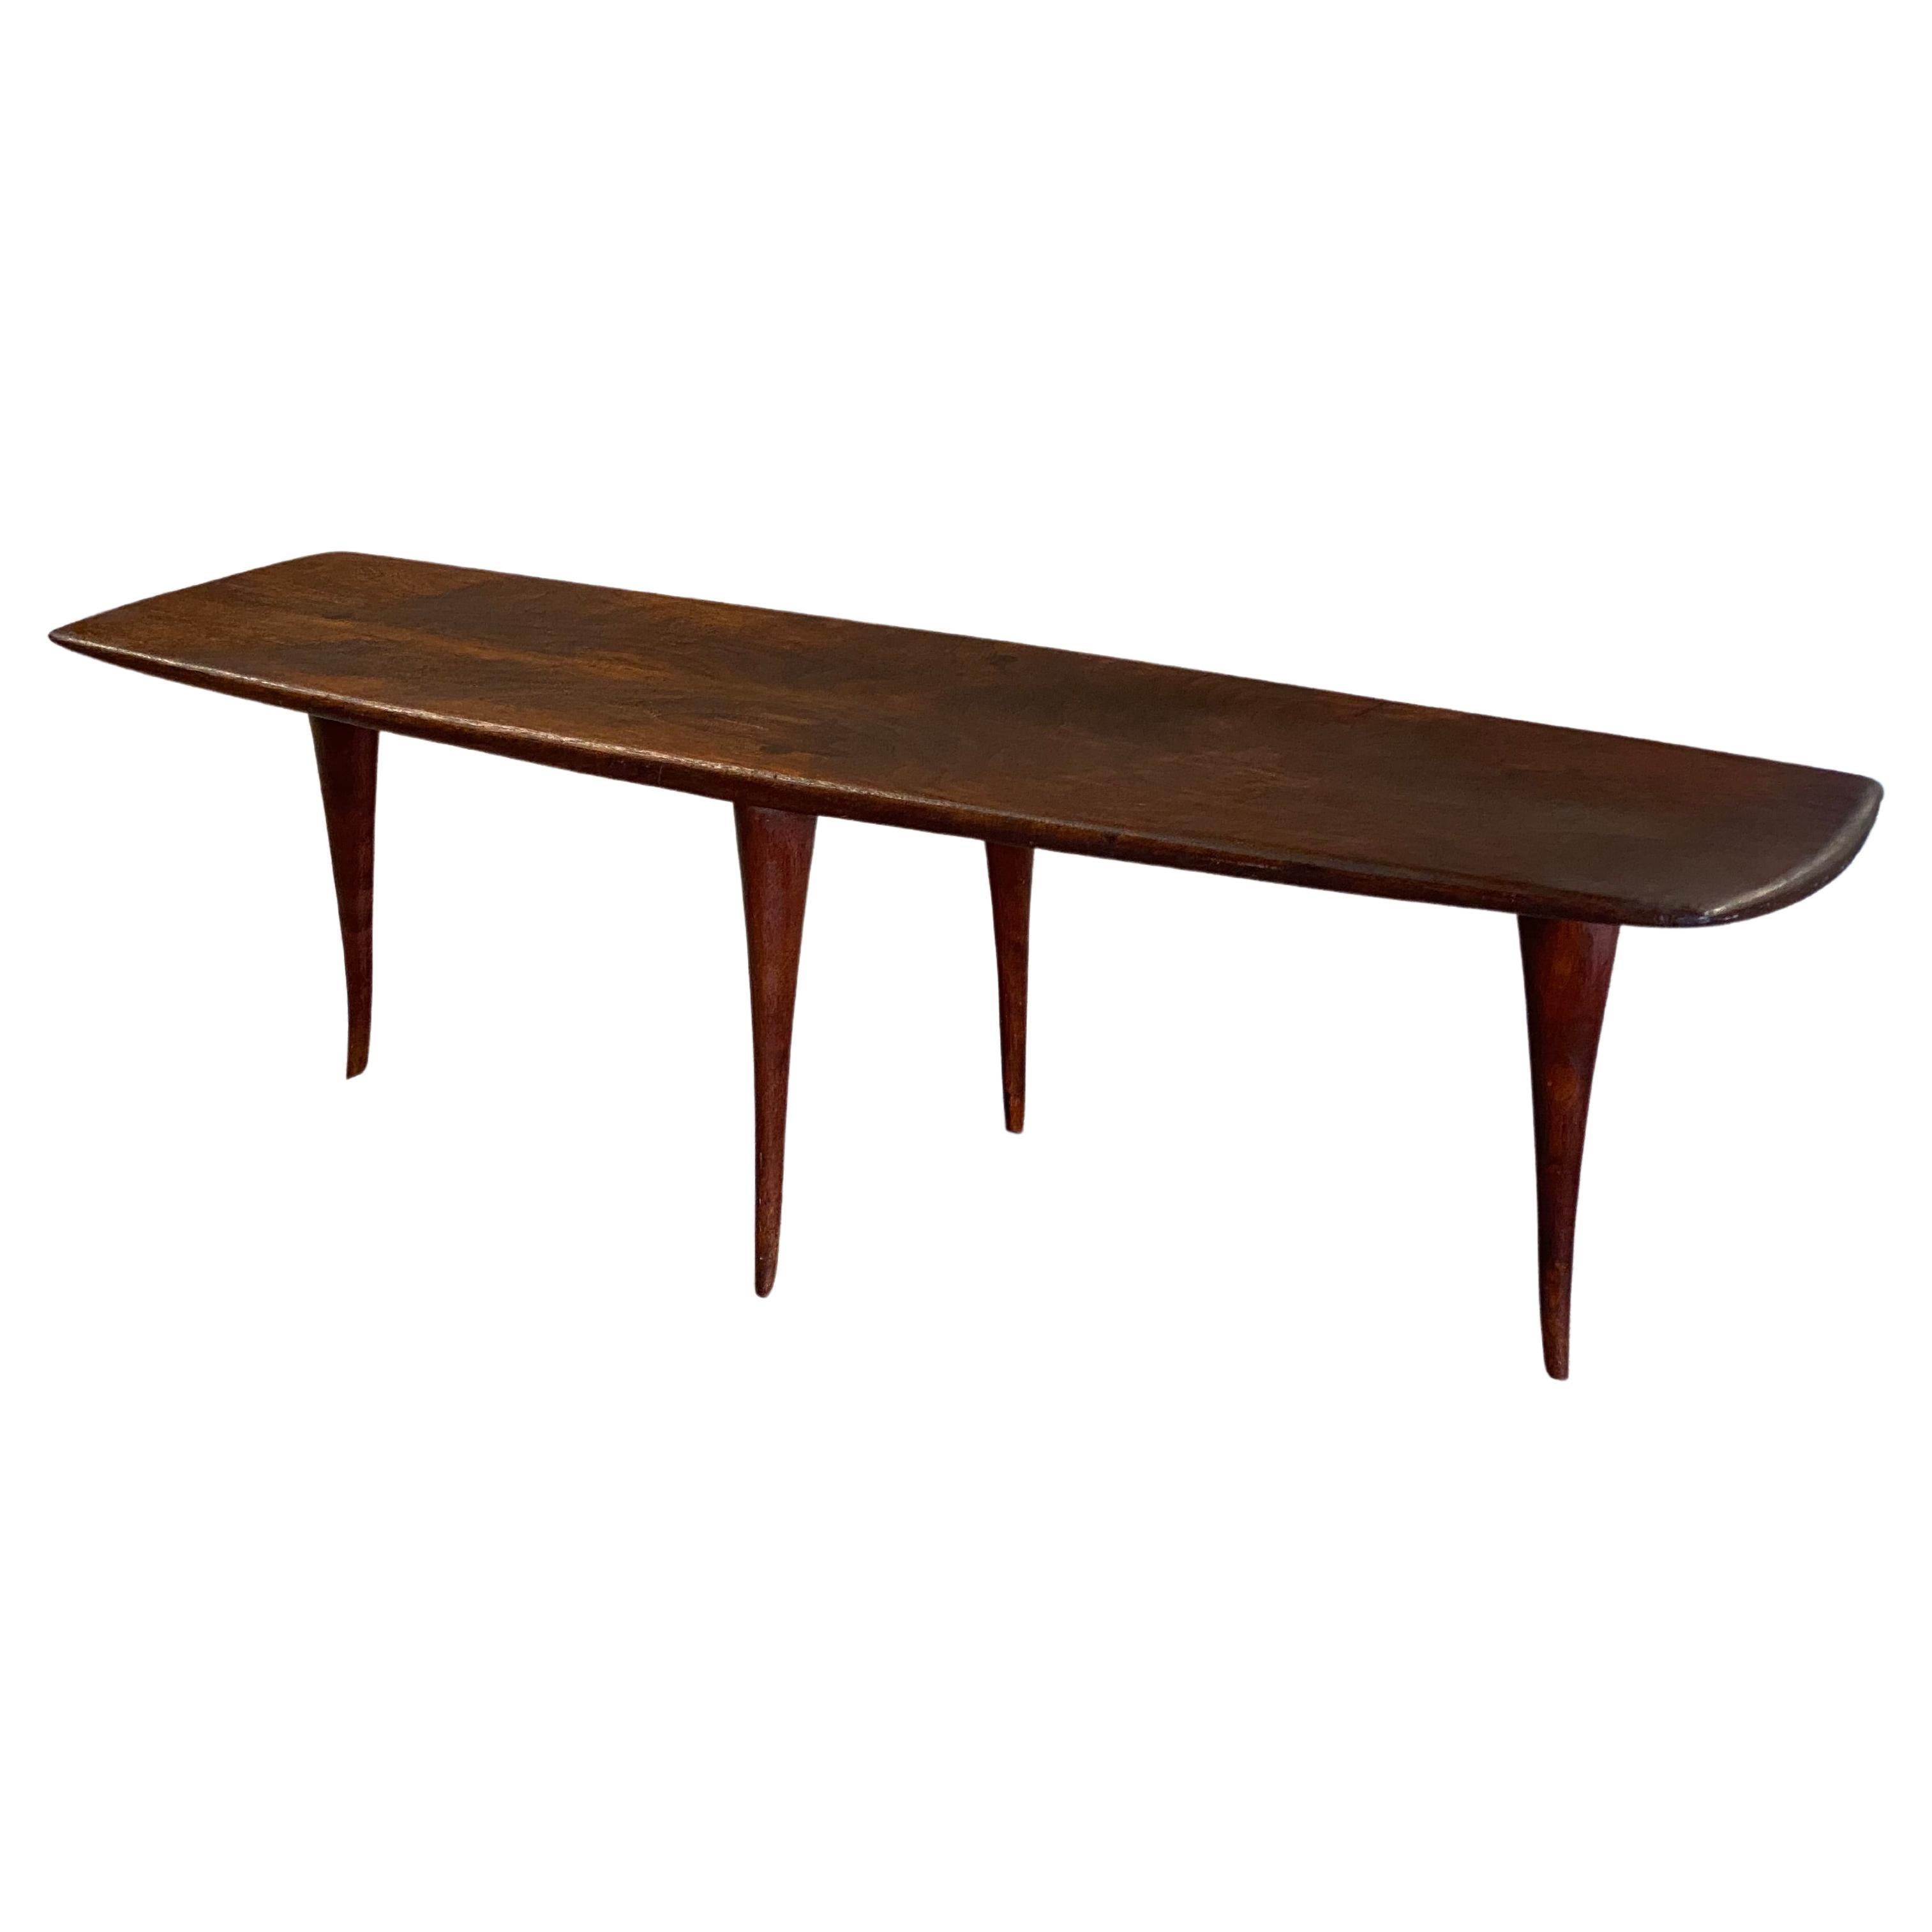 Dirk Rosse American Studio Crafts Movement Walnut Coffee Table For Sale